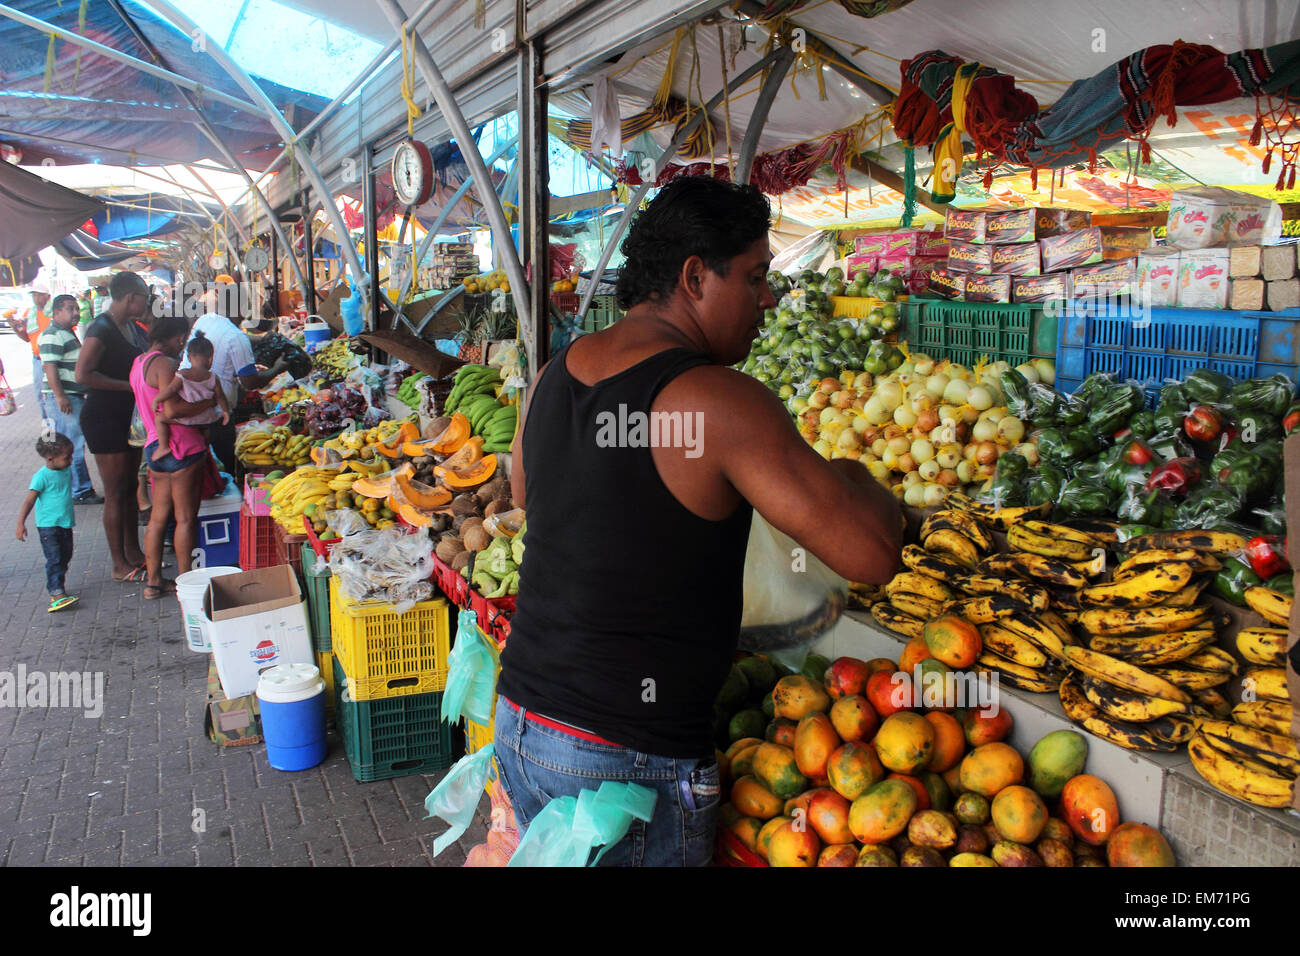 The colorful outdoor market along the docks in Willemstad, Curacao. Stock Photo